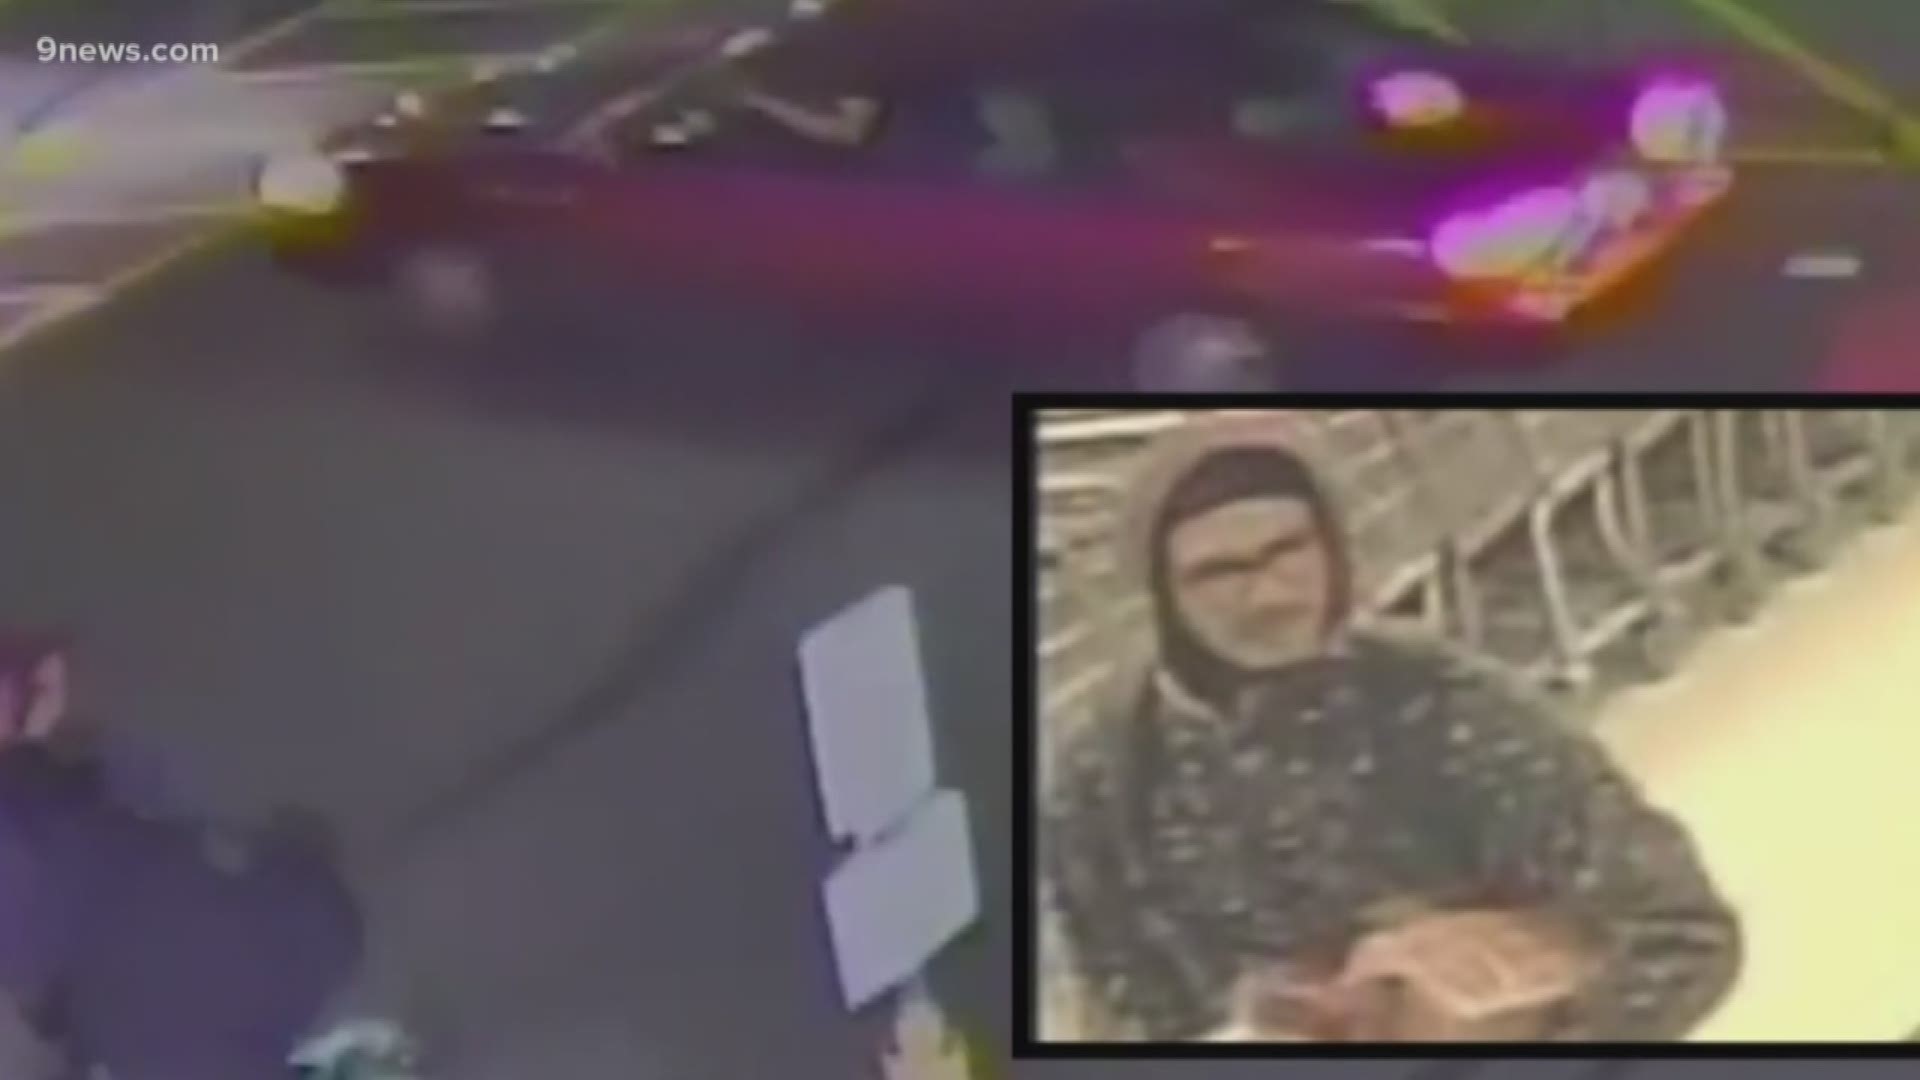 He was brutally attacked by a stranger in the grocery store parking lot, and now the Aurora Police Department is asking for the public's help in finding that person.